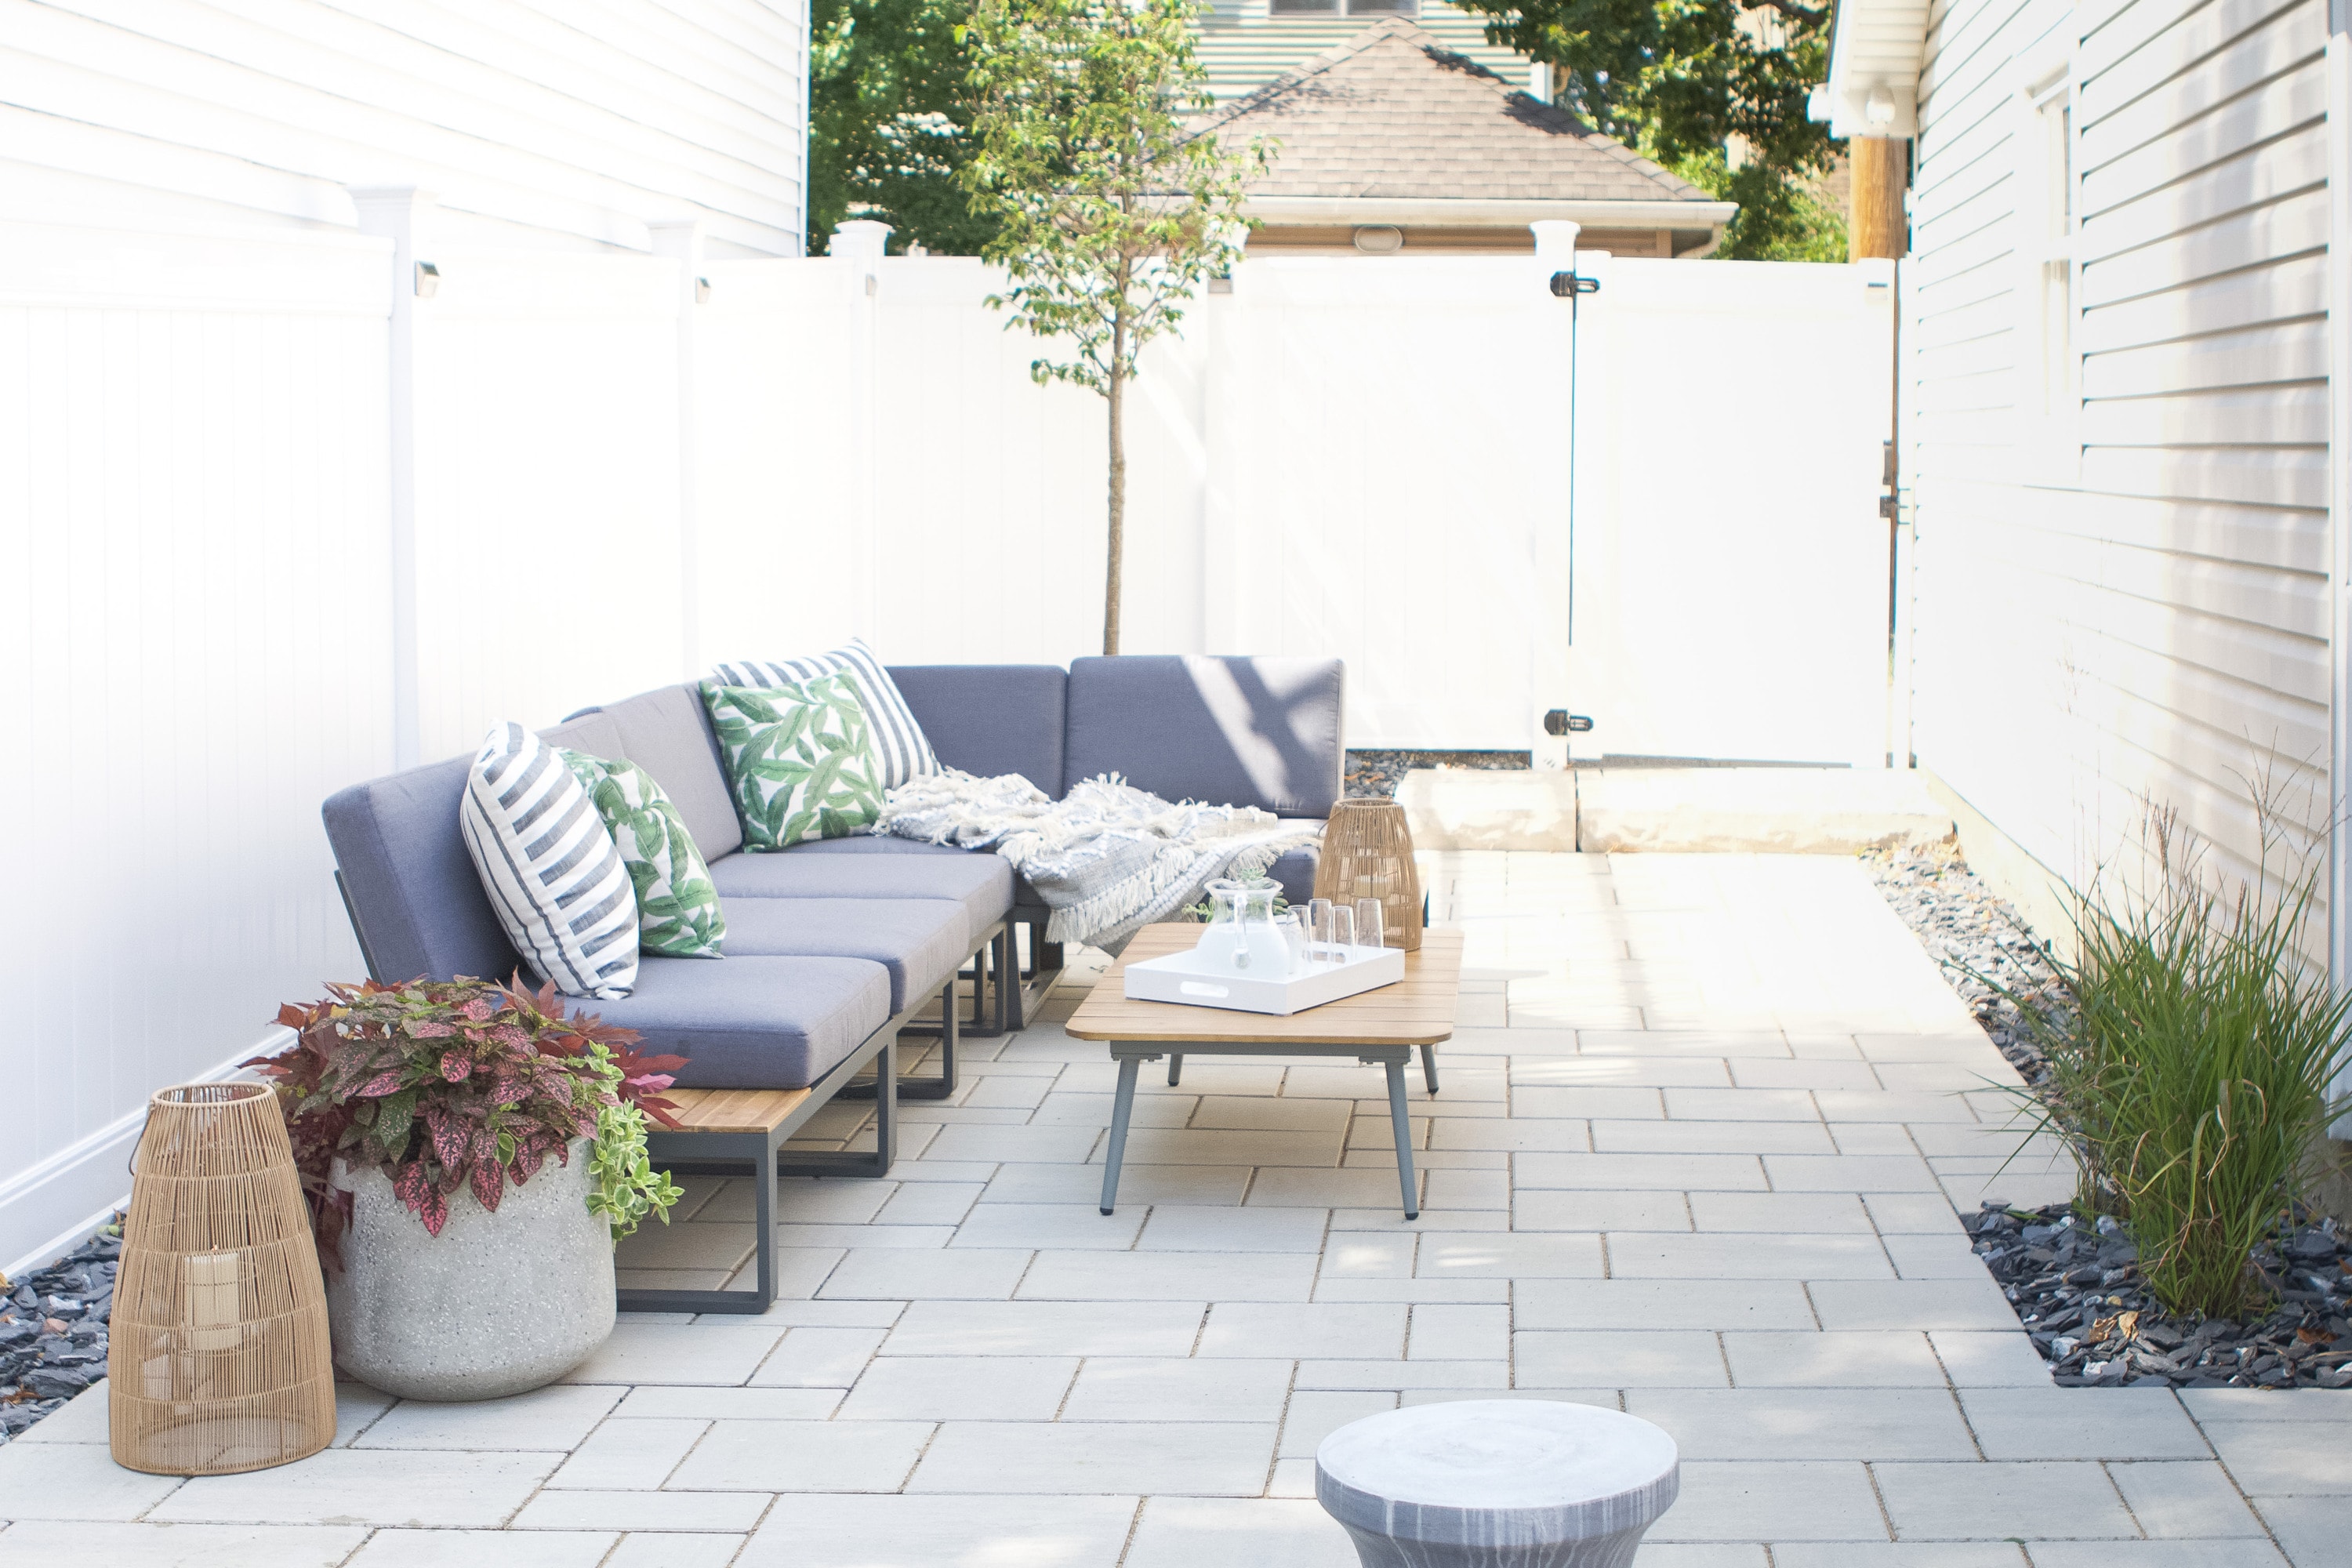 Our backyard makeover reveal